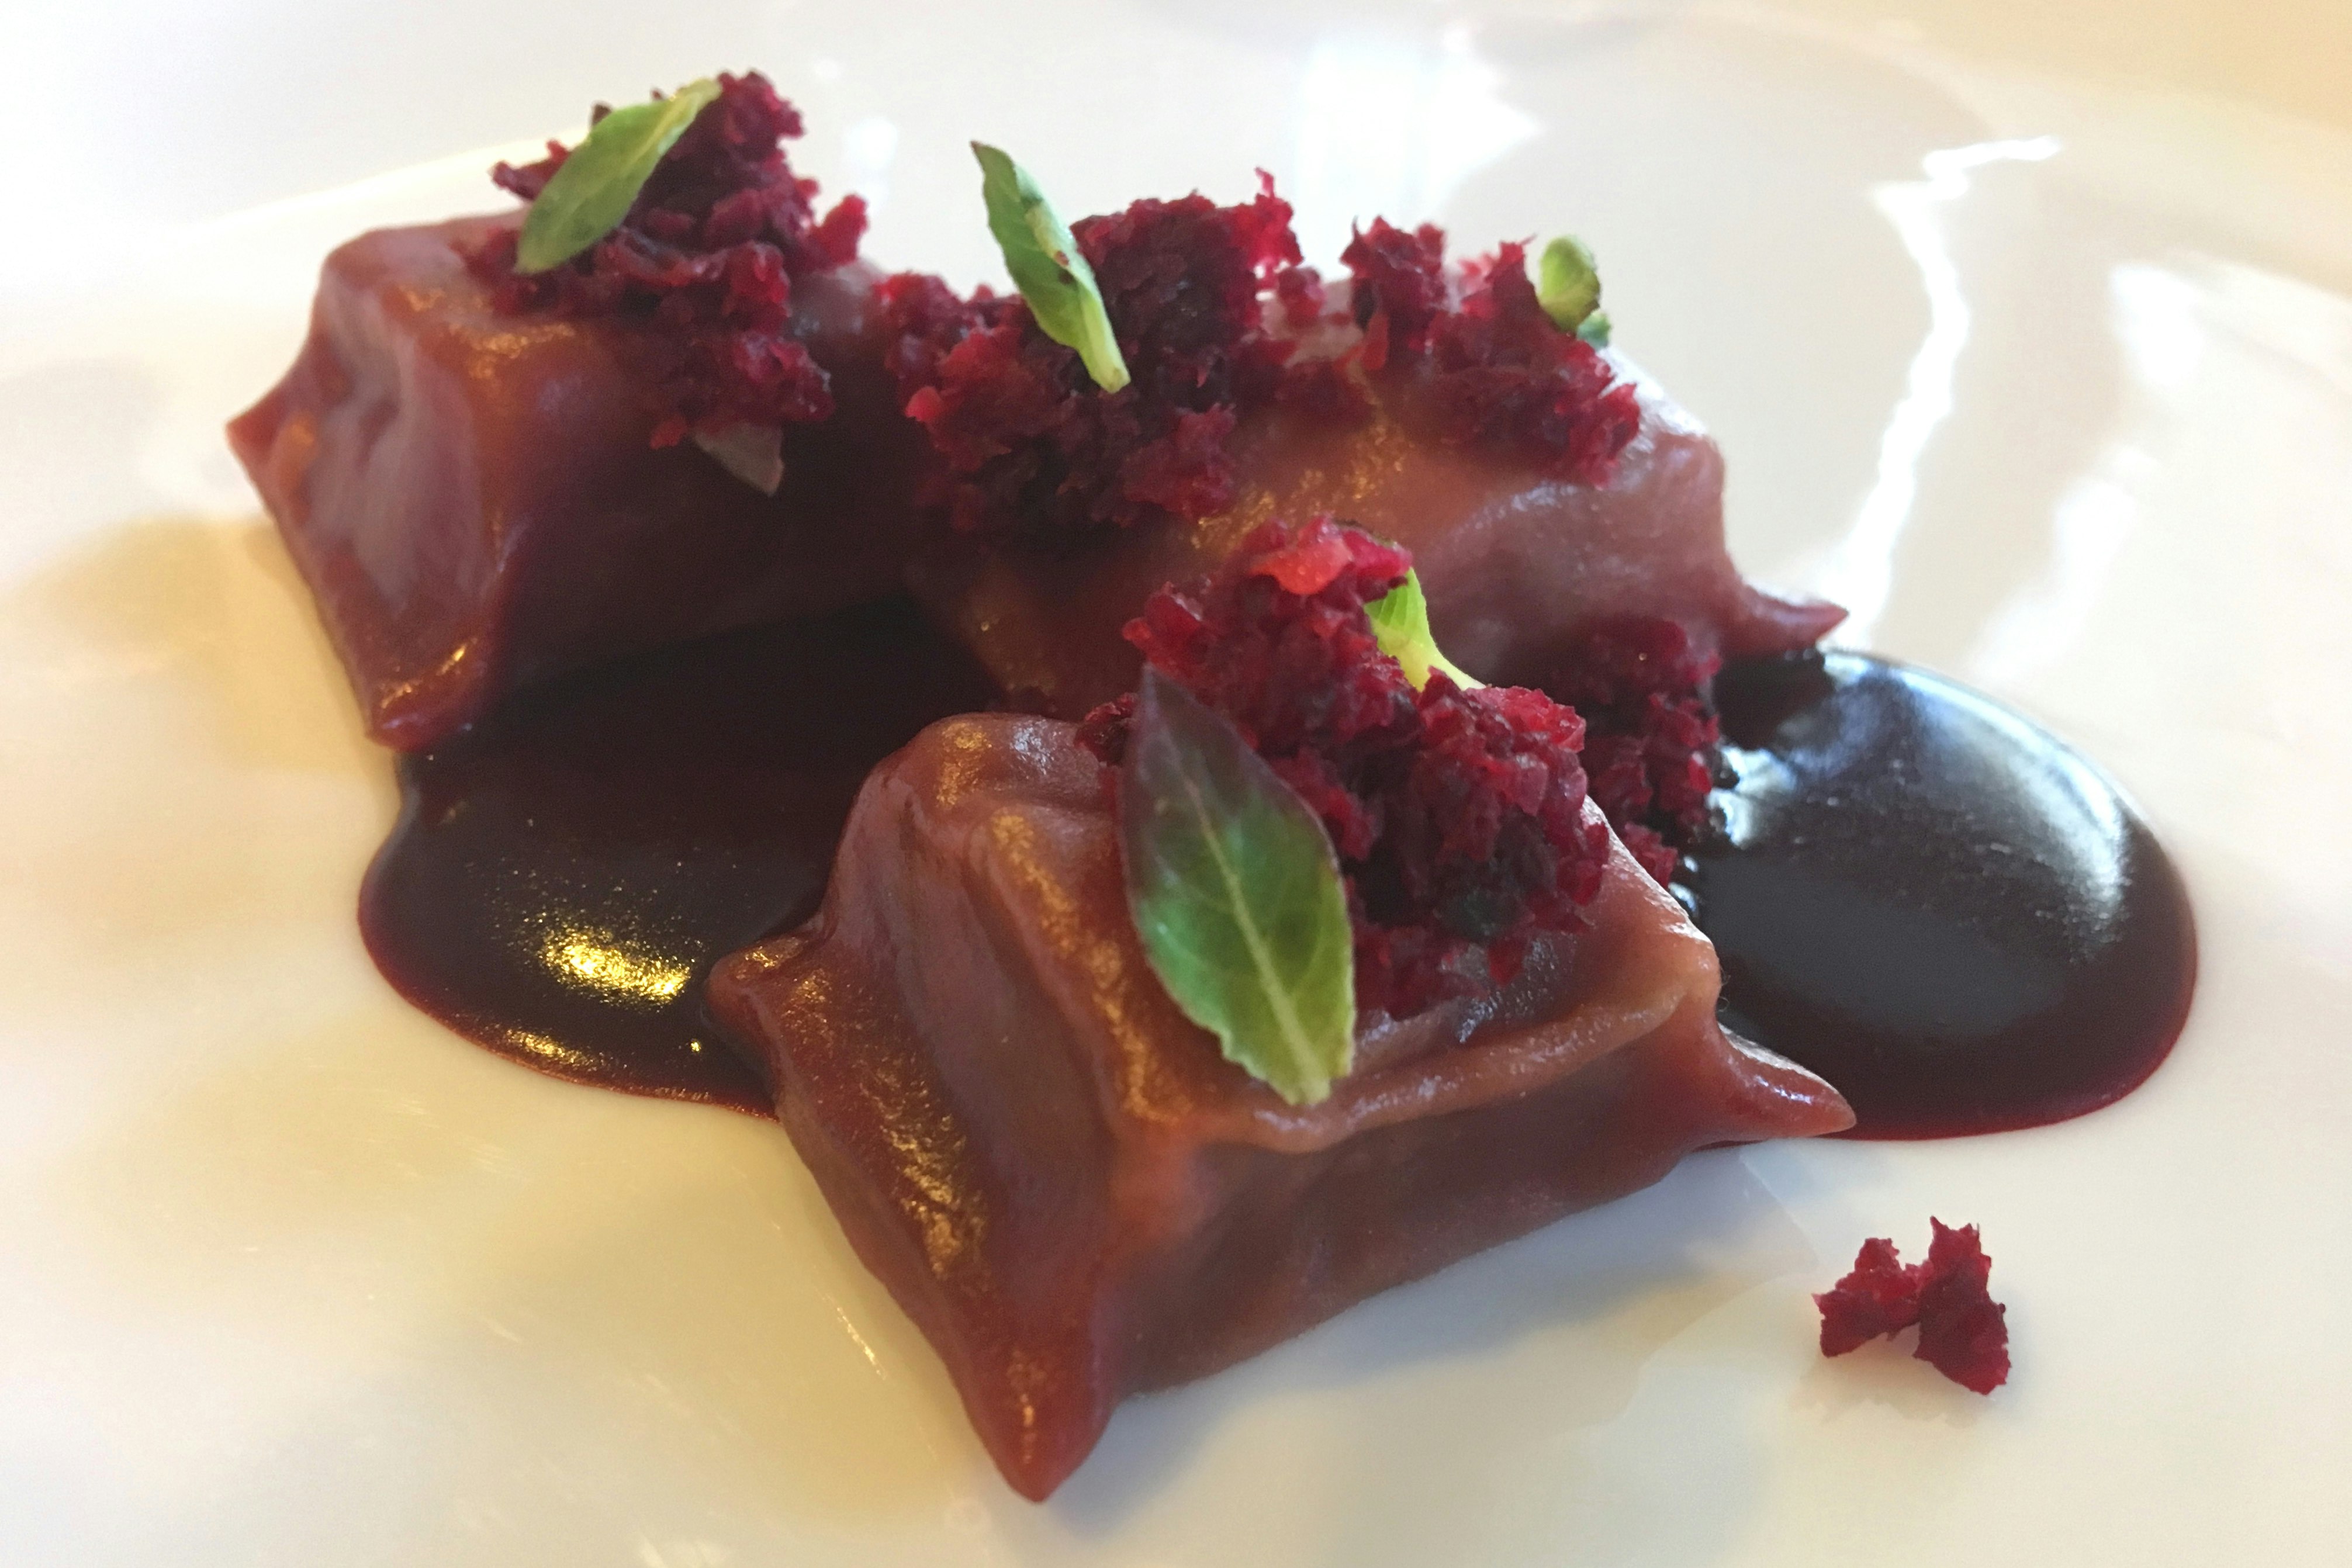 Seasonal dishes such as ox-cheek ravioli with beetroot and evening primrose leaves